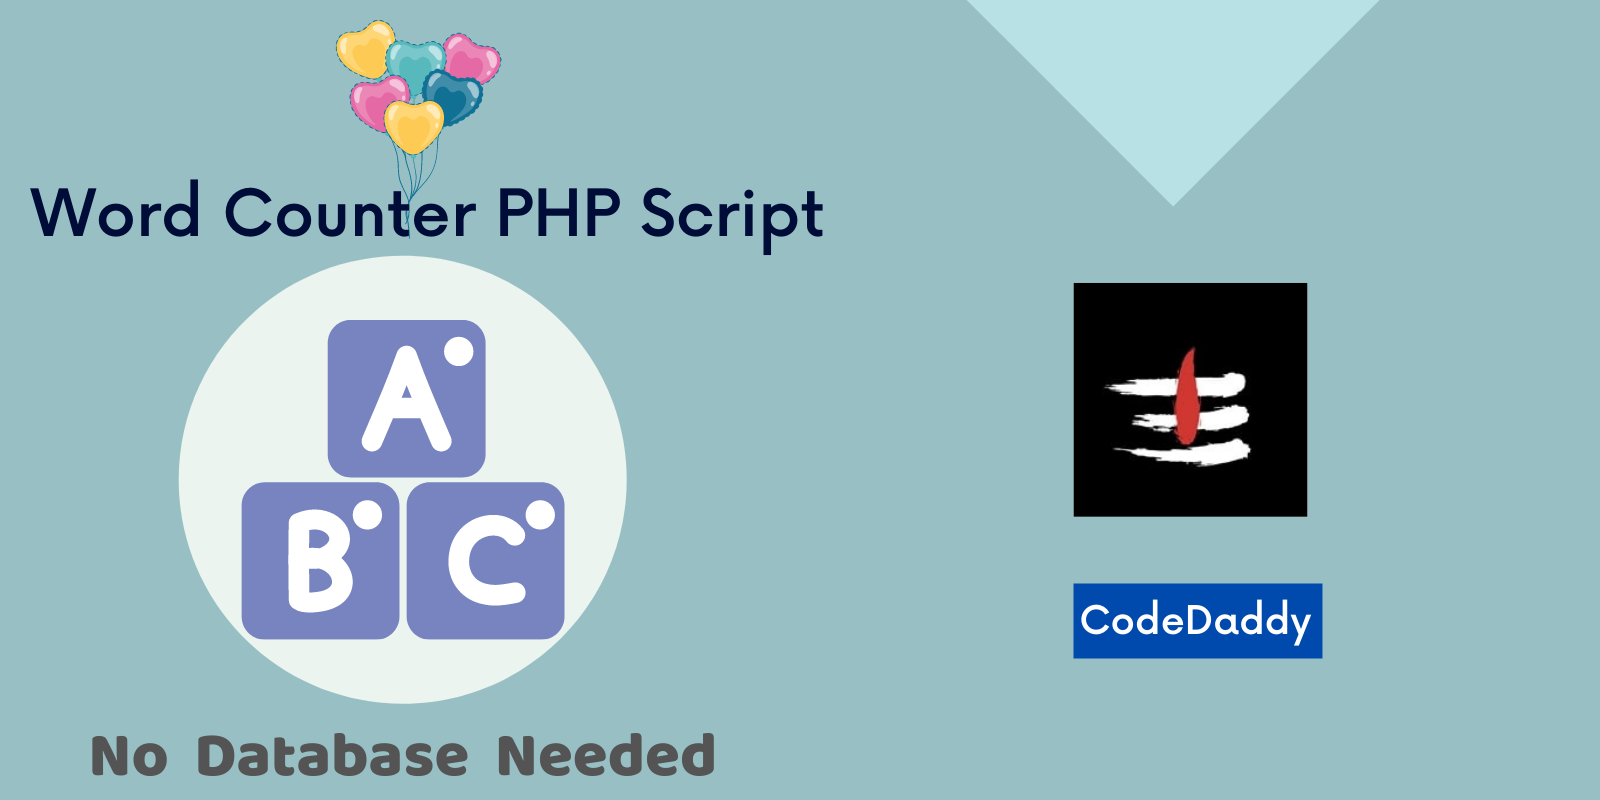 WC - Word Counter PHP Script